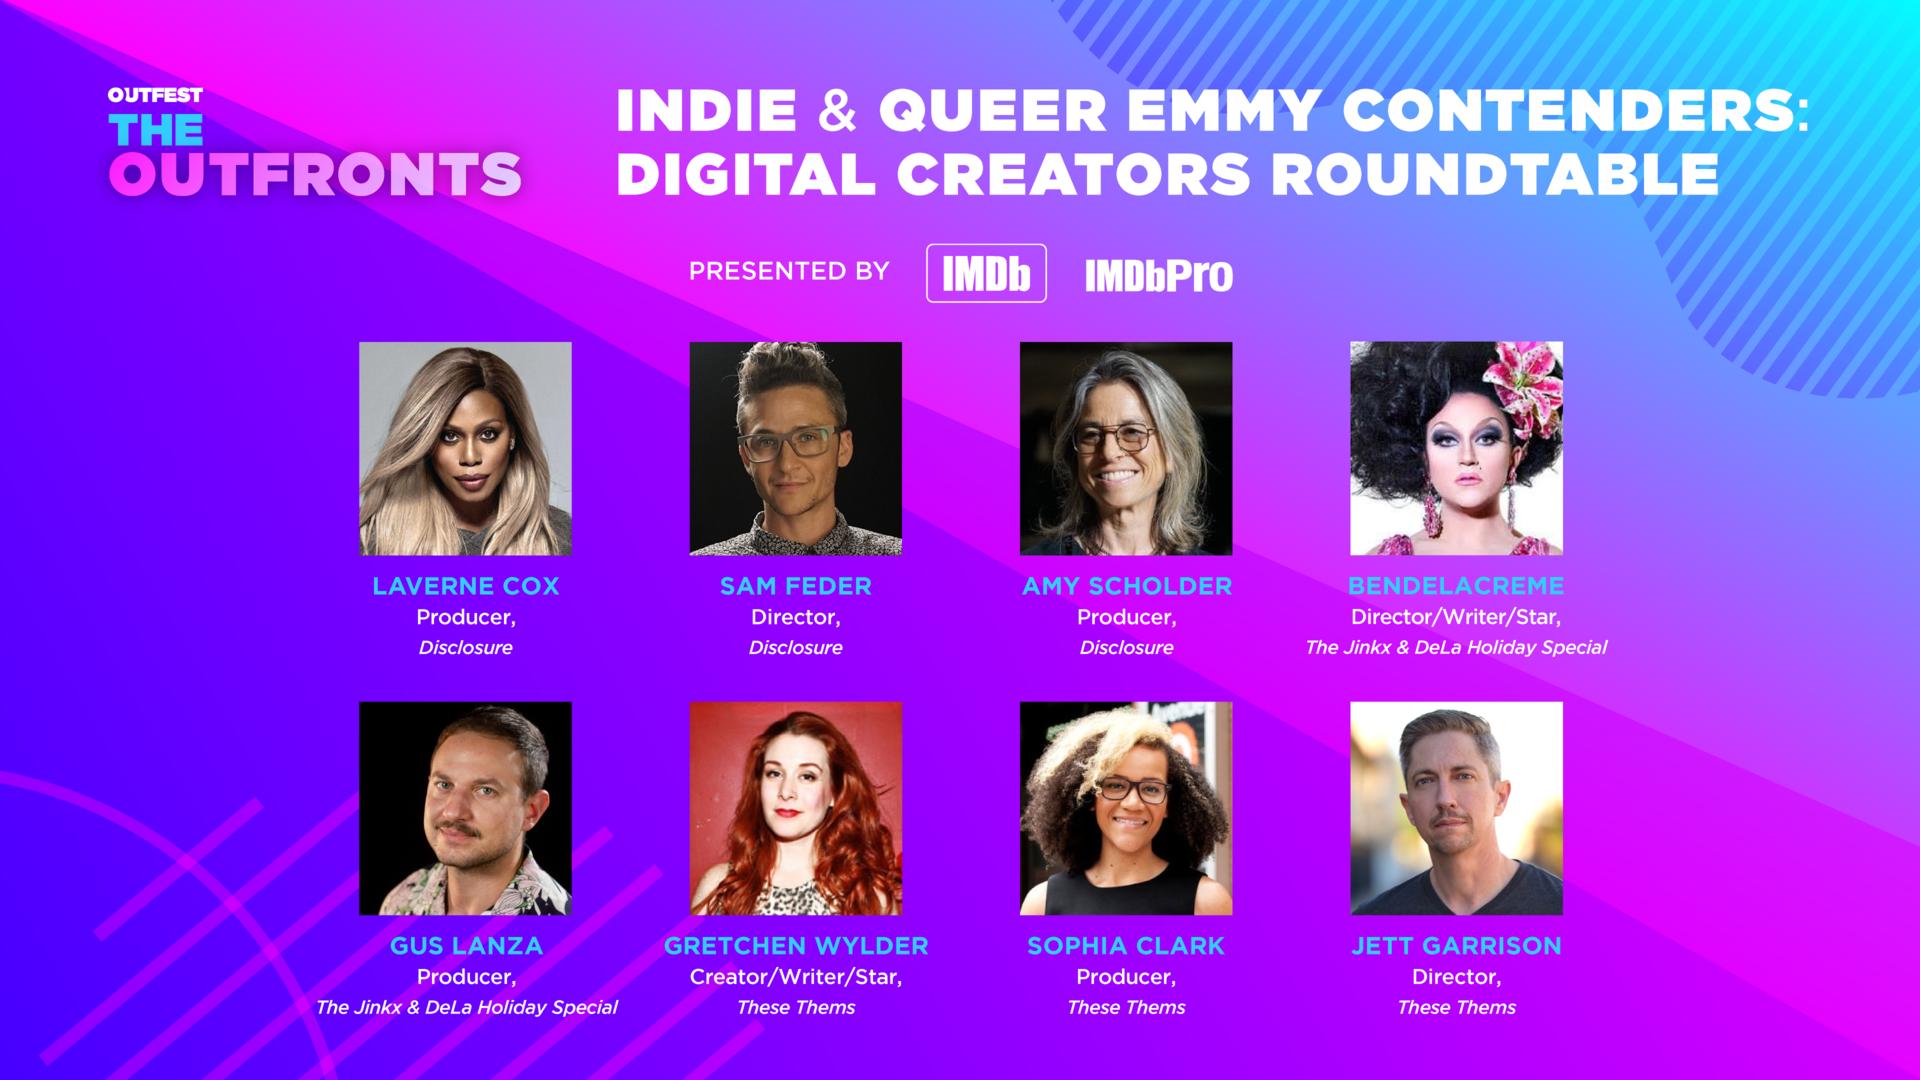 The Outfronts '21: Indie & Queer Emmy® Contenders: Digital Creators Roundtable